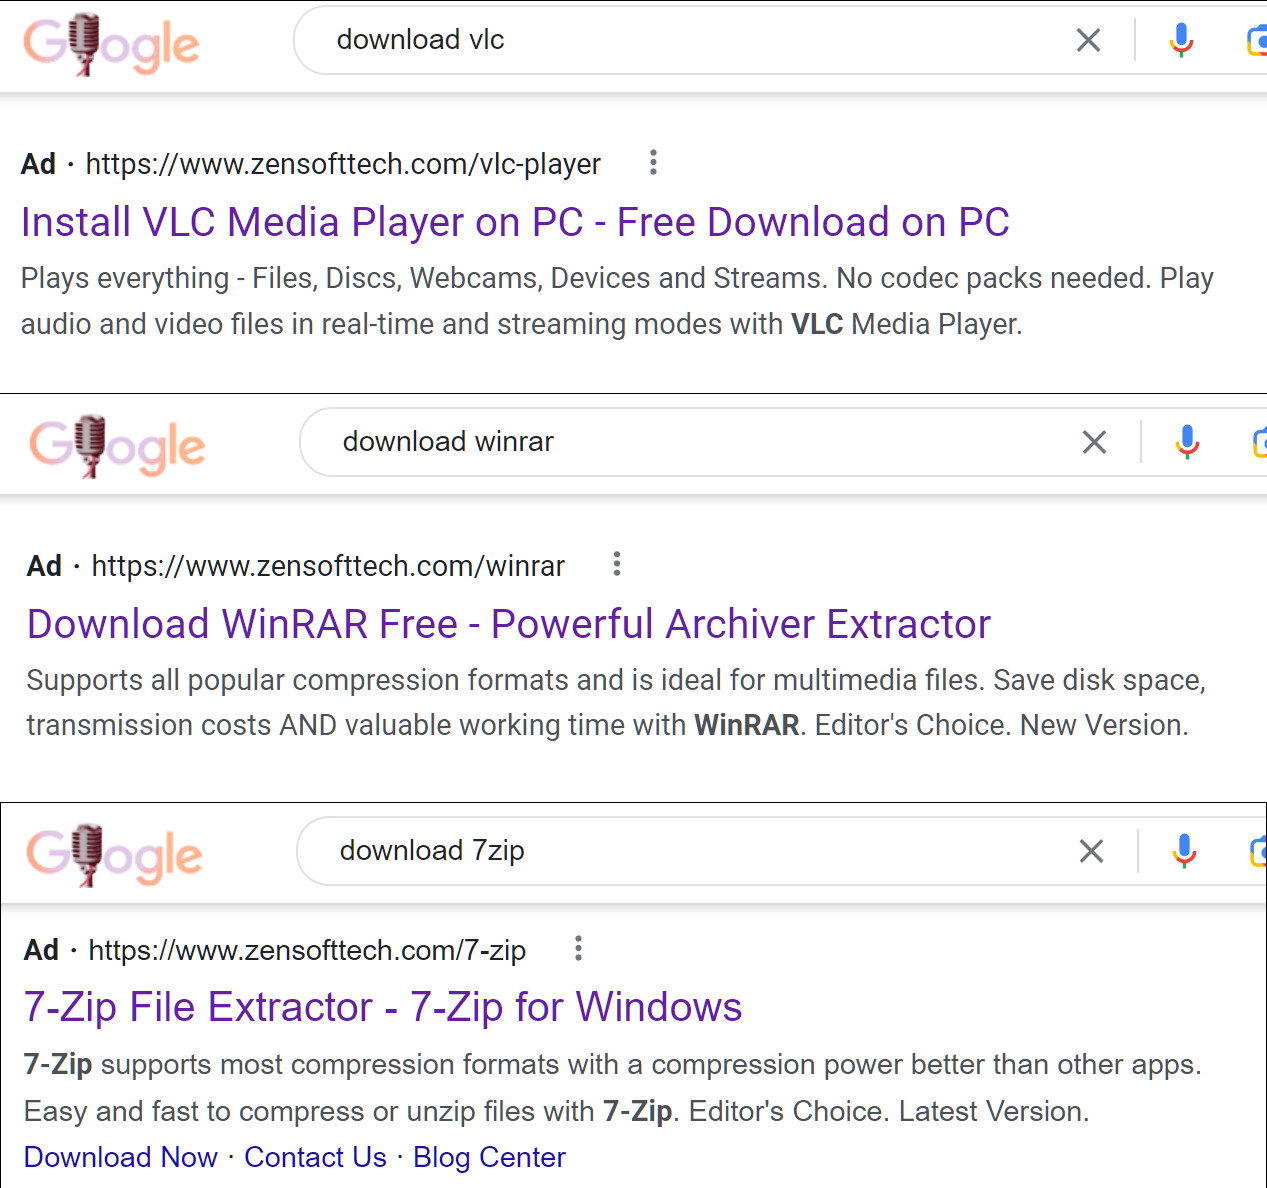 Malicious downloads for WinRAR, 7-ZIP, VLC in sponsored ads on Google search